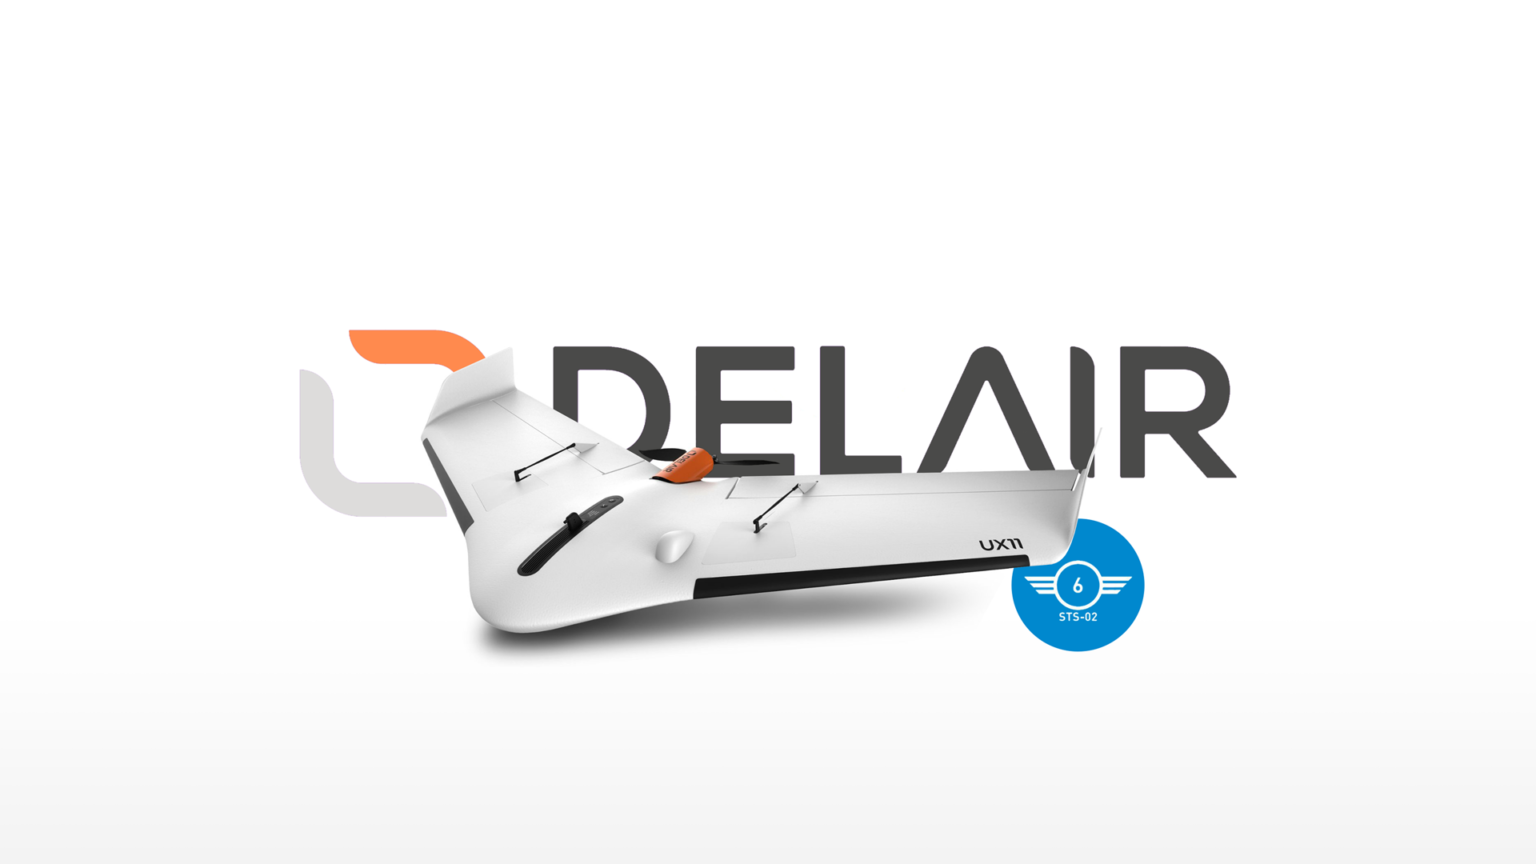 Delair is the first drone in the world to receive the C6 classification for STS-02